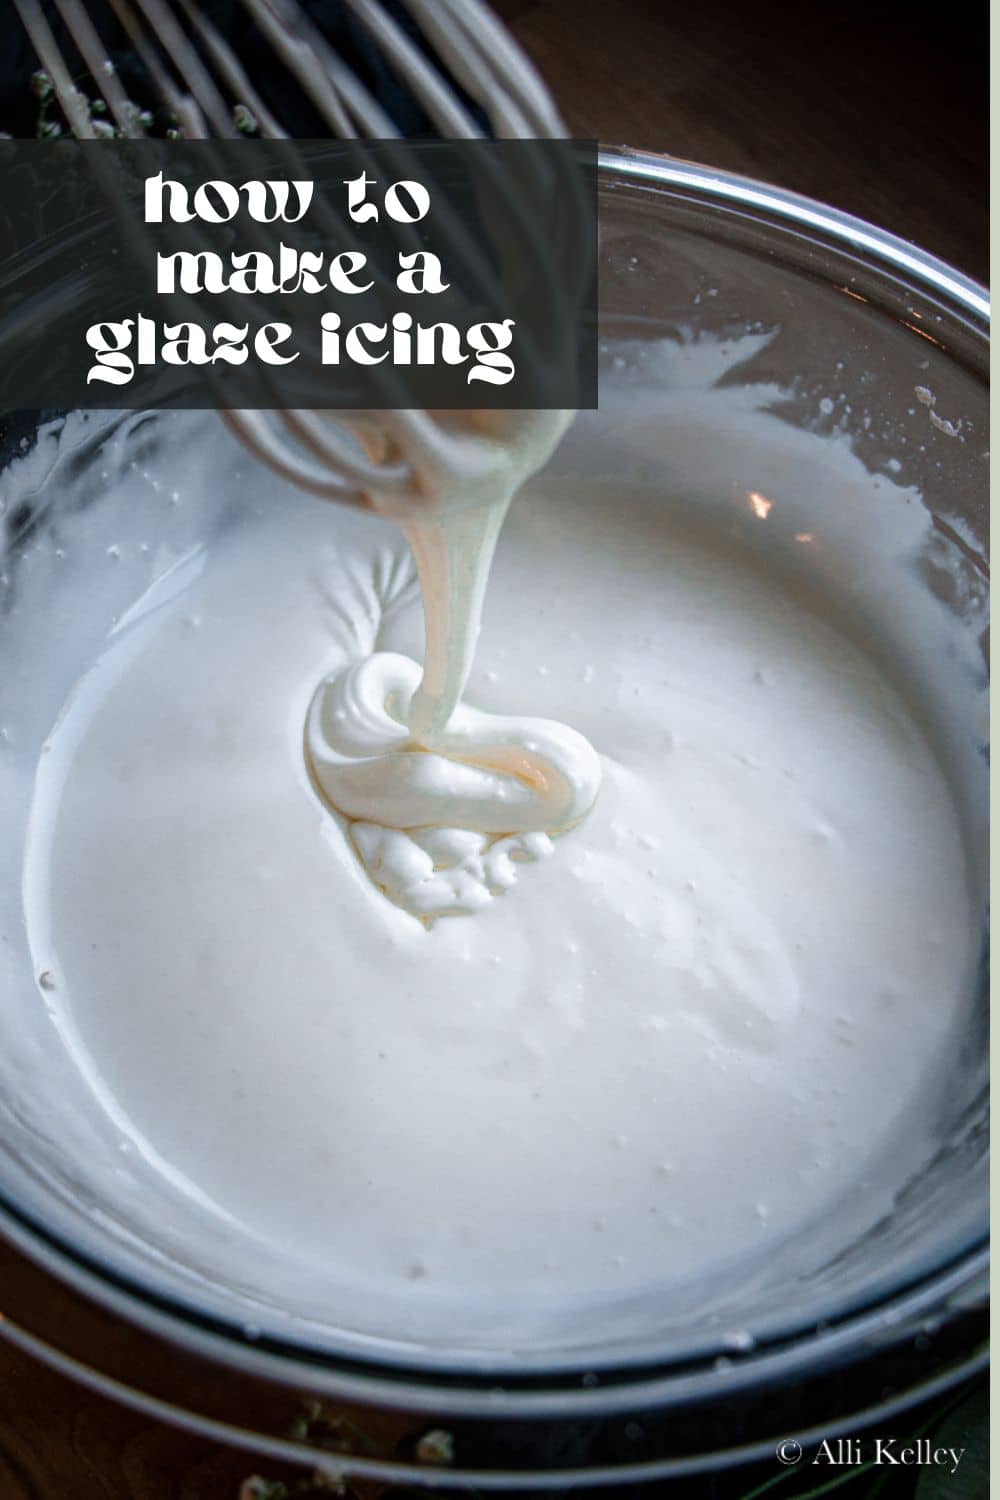 Topping any baked treat with this glaze icing recipe will take it from good to great! Simple, sweet, and oh-so-delicious - glaze icing is a classic that never goes out of style. Made with just a few ingredients, it's also incredibly easy to whip up. So the next time you need a tasty topping, give this glazed icing recipe a try!